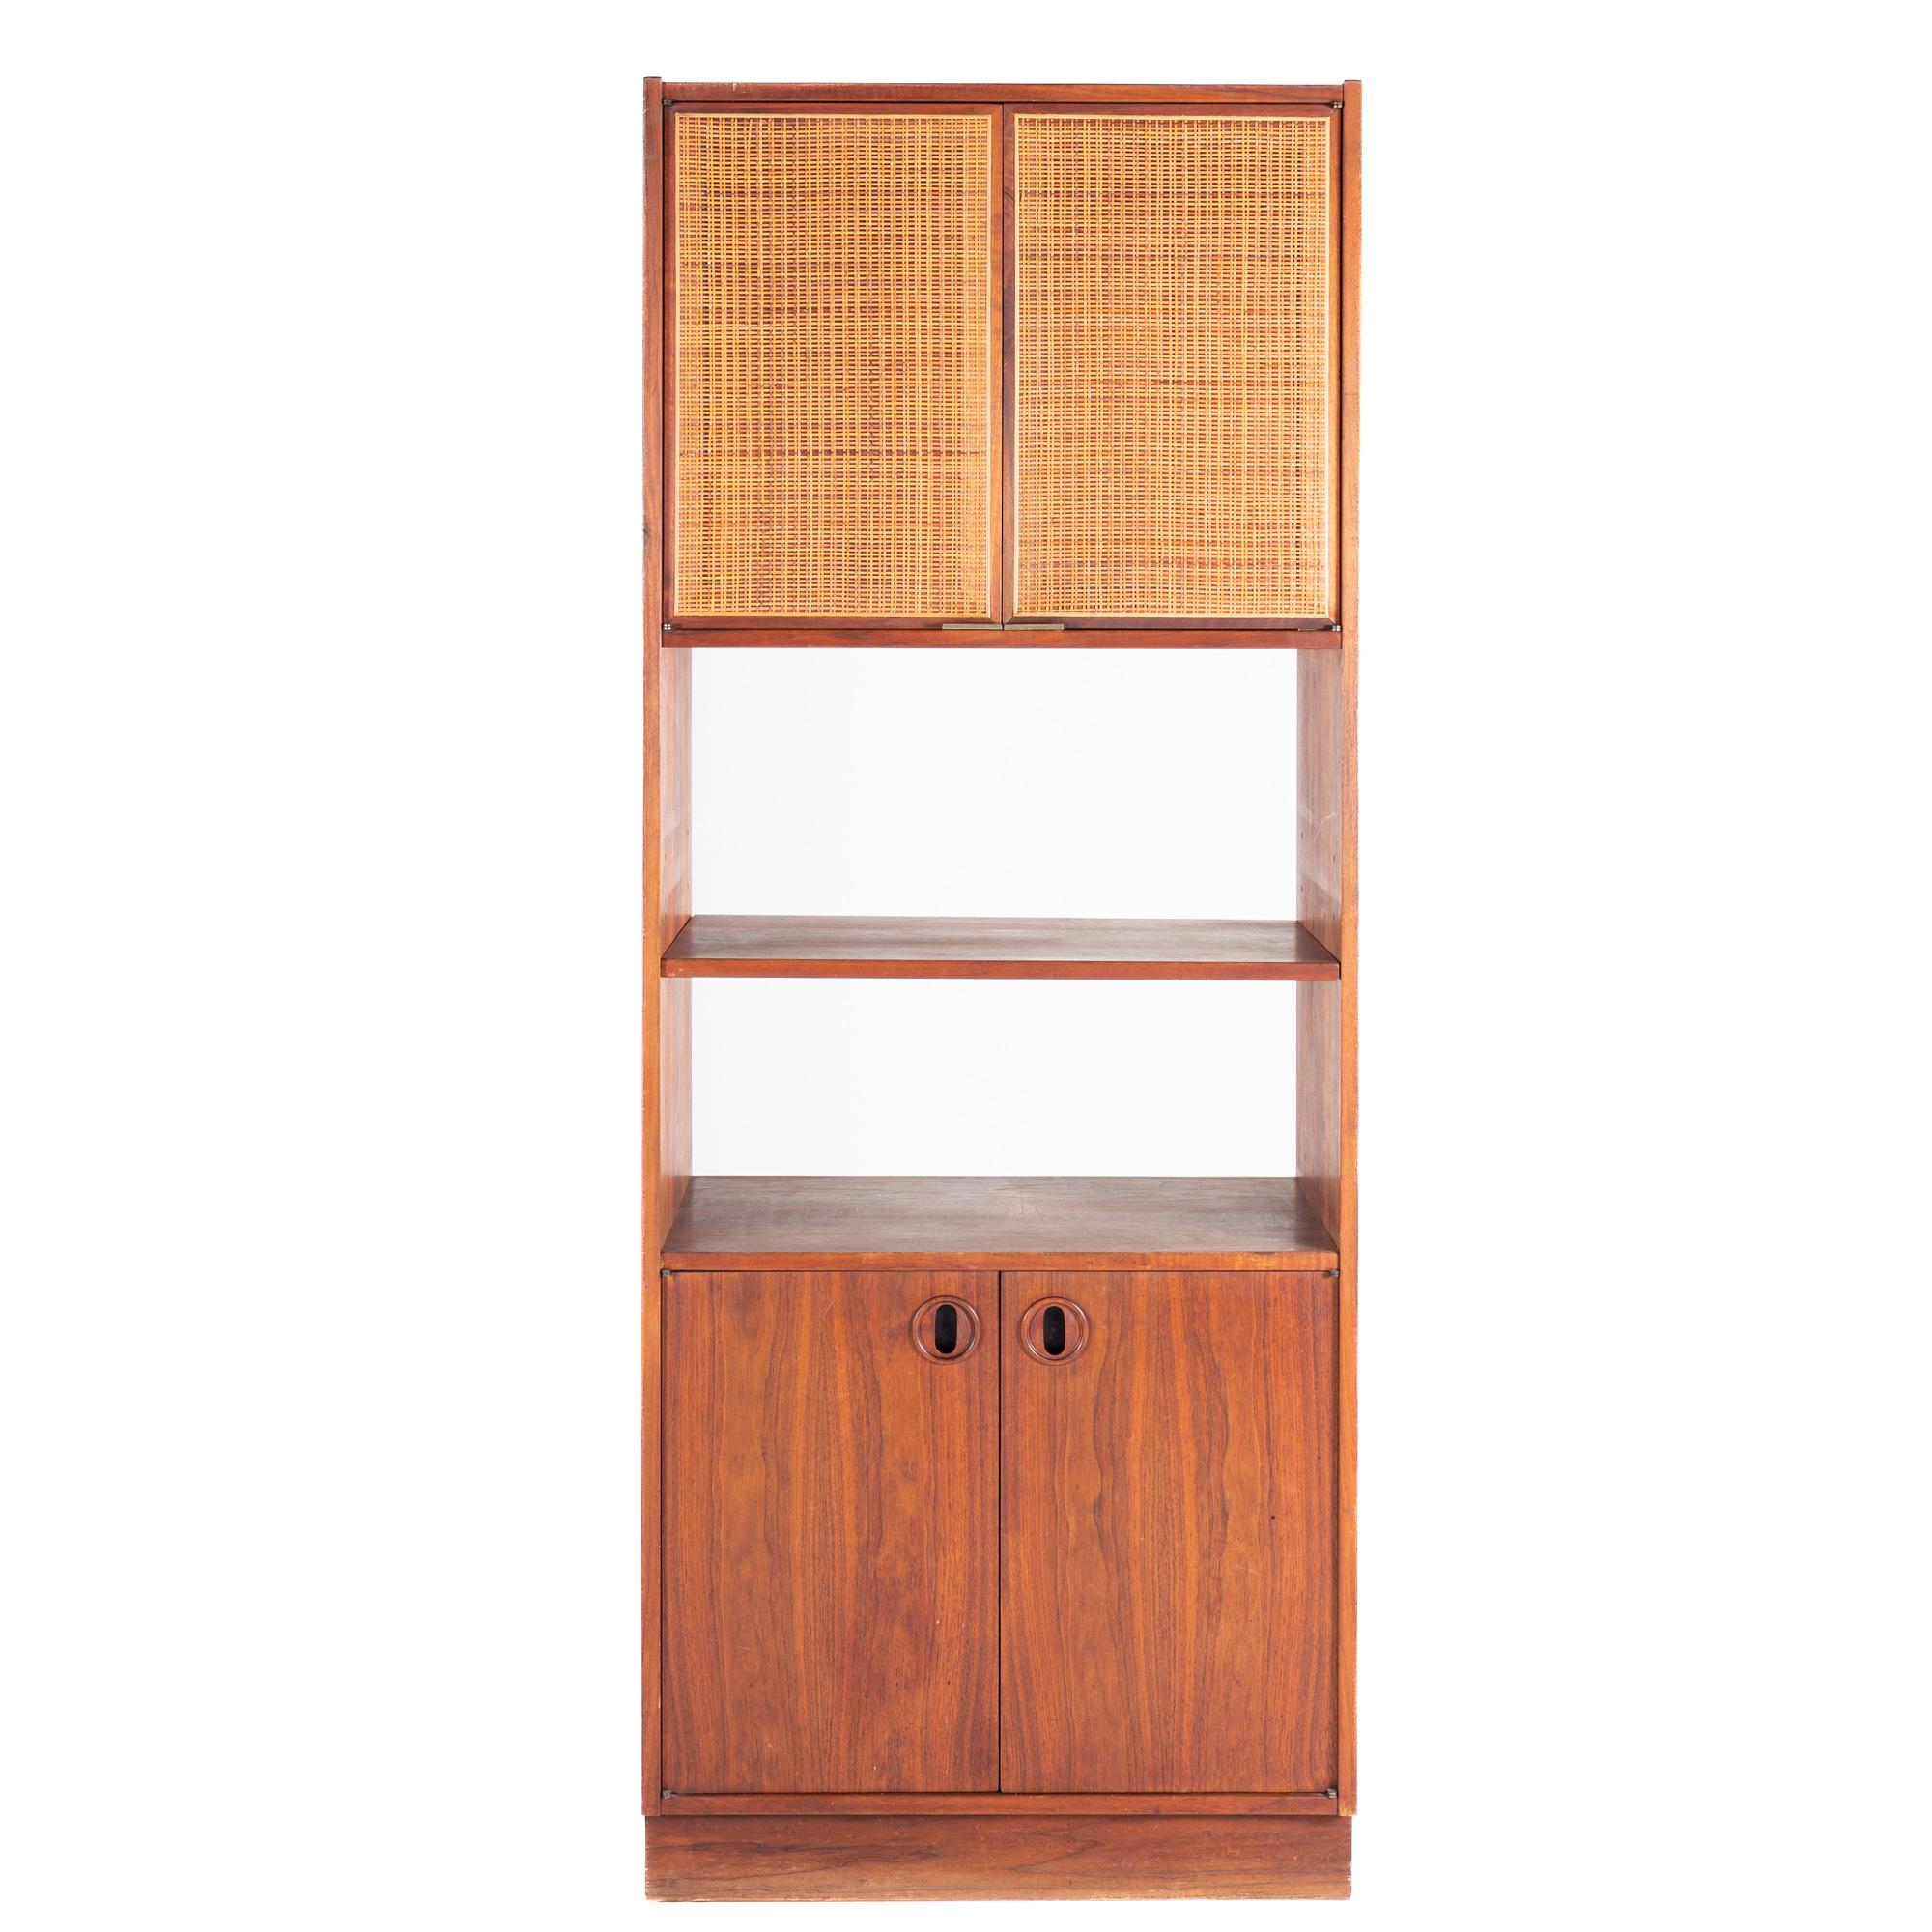 Founders style mid century walnut and cane display shelf

The shelf measures: 30.5 wide x 16.25 deep x 77.5 inches high

All pieces of furniture can be had in what we call restored vintage condition. That means the piece is restored upon